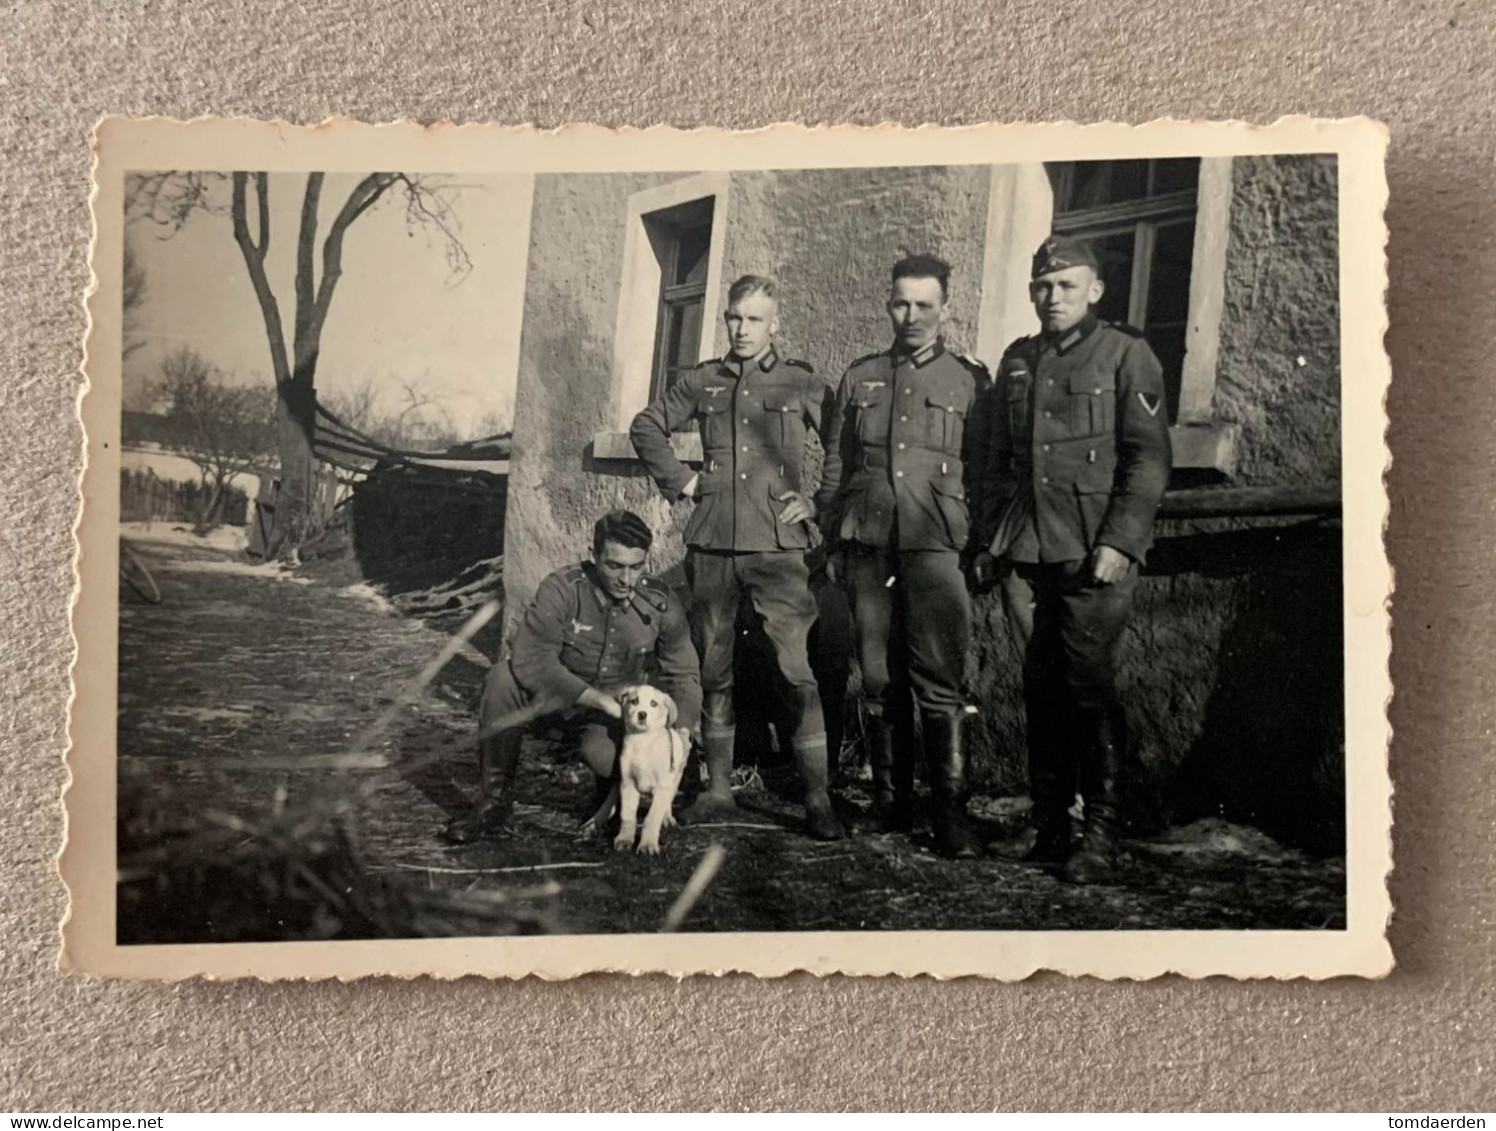 Lot 2 pictures Vilseck Ebersbach German soldiers in March 1940 in rest.